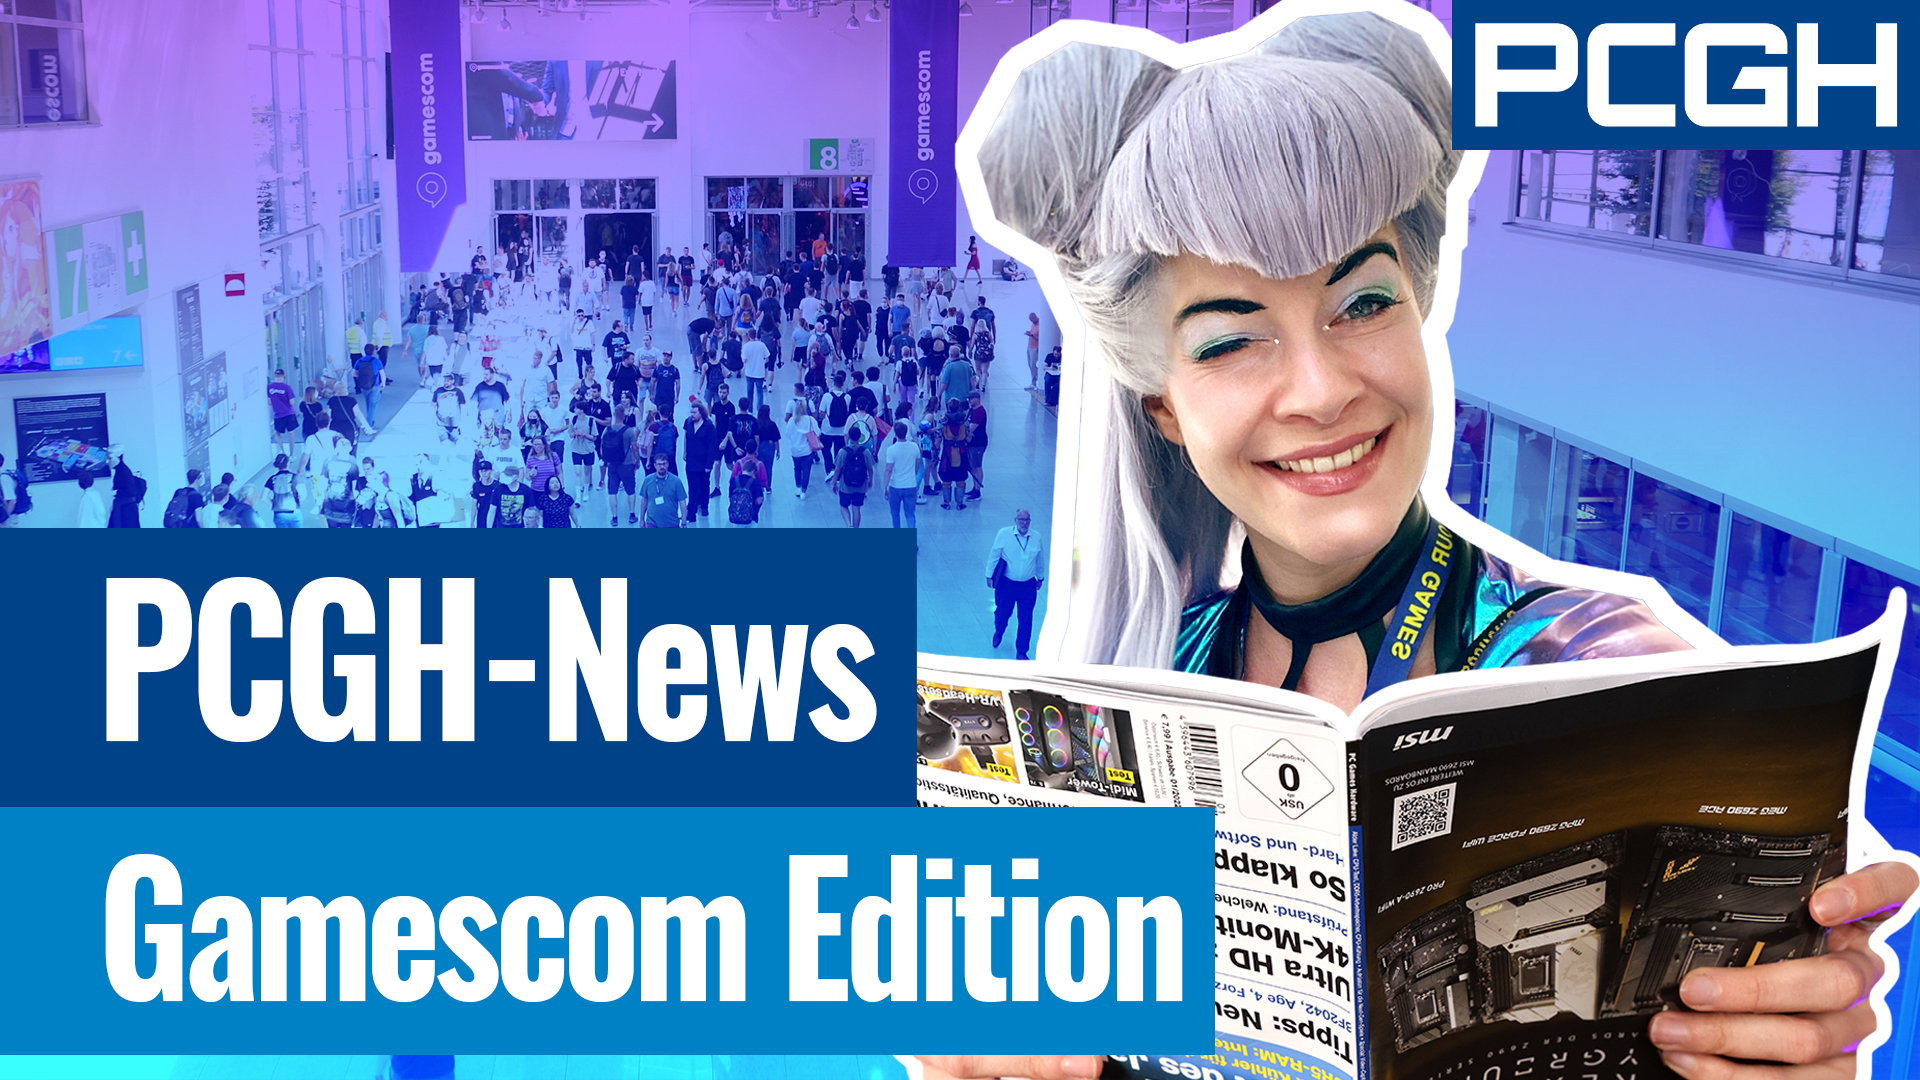 PCGH News 08/27: Gamescom issue - Asus motherboards for Ryzen 7000, Samsung SSD 990 Pro